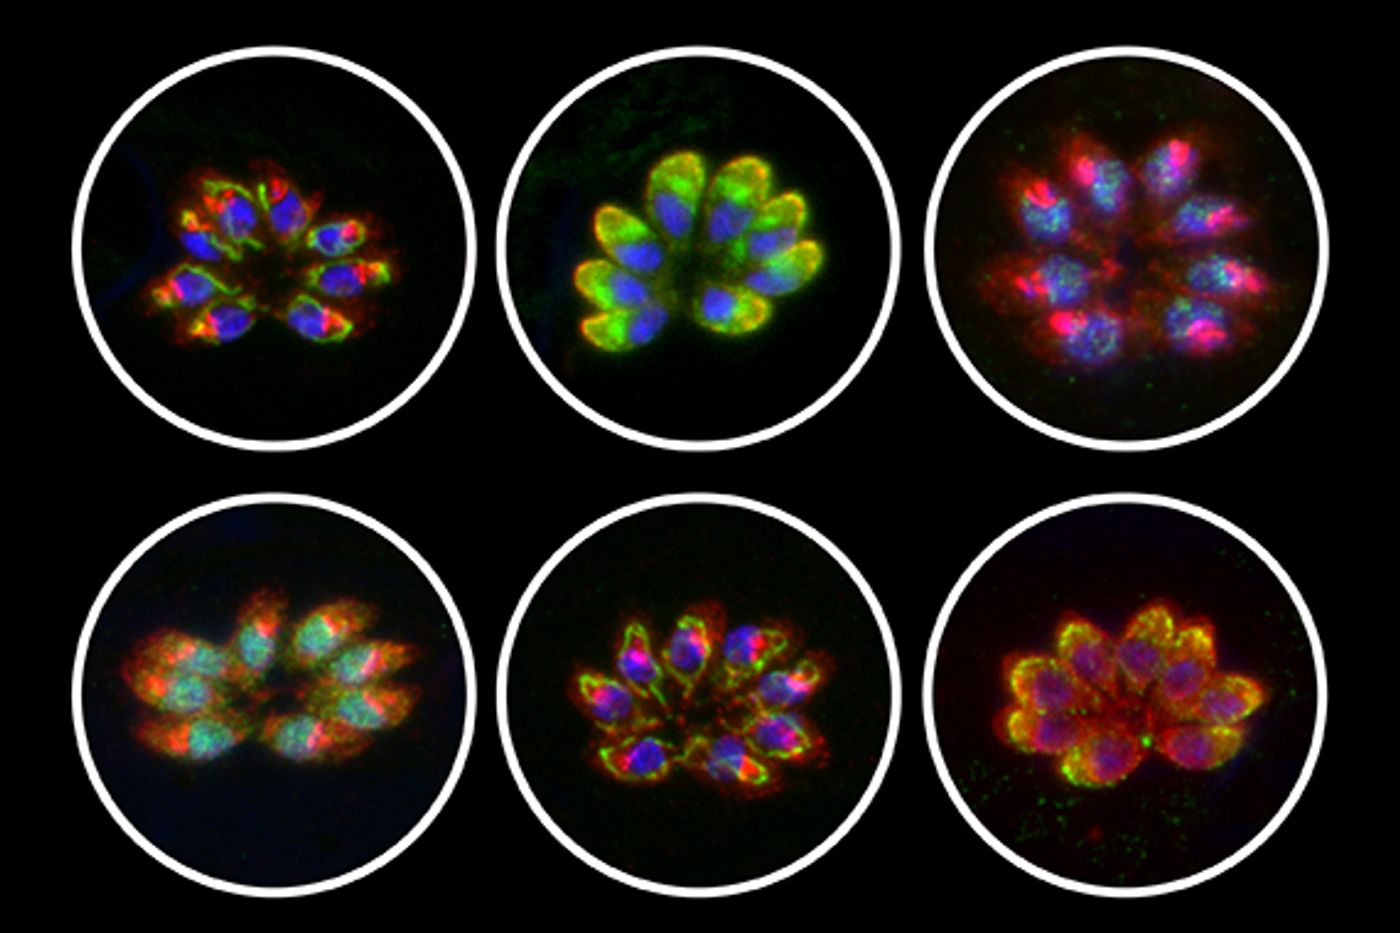 The localization of six previously uncharacterized proteins essential for the survival of the parasite in human cells and conserved through the Apicomplexan phylum, within a parasitophorous vacuole containing eight parasites inside of a host cell. / Credit: Diego Huet/Whitehead Institute